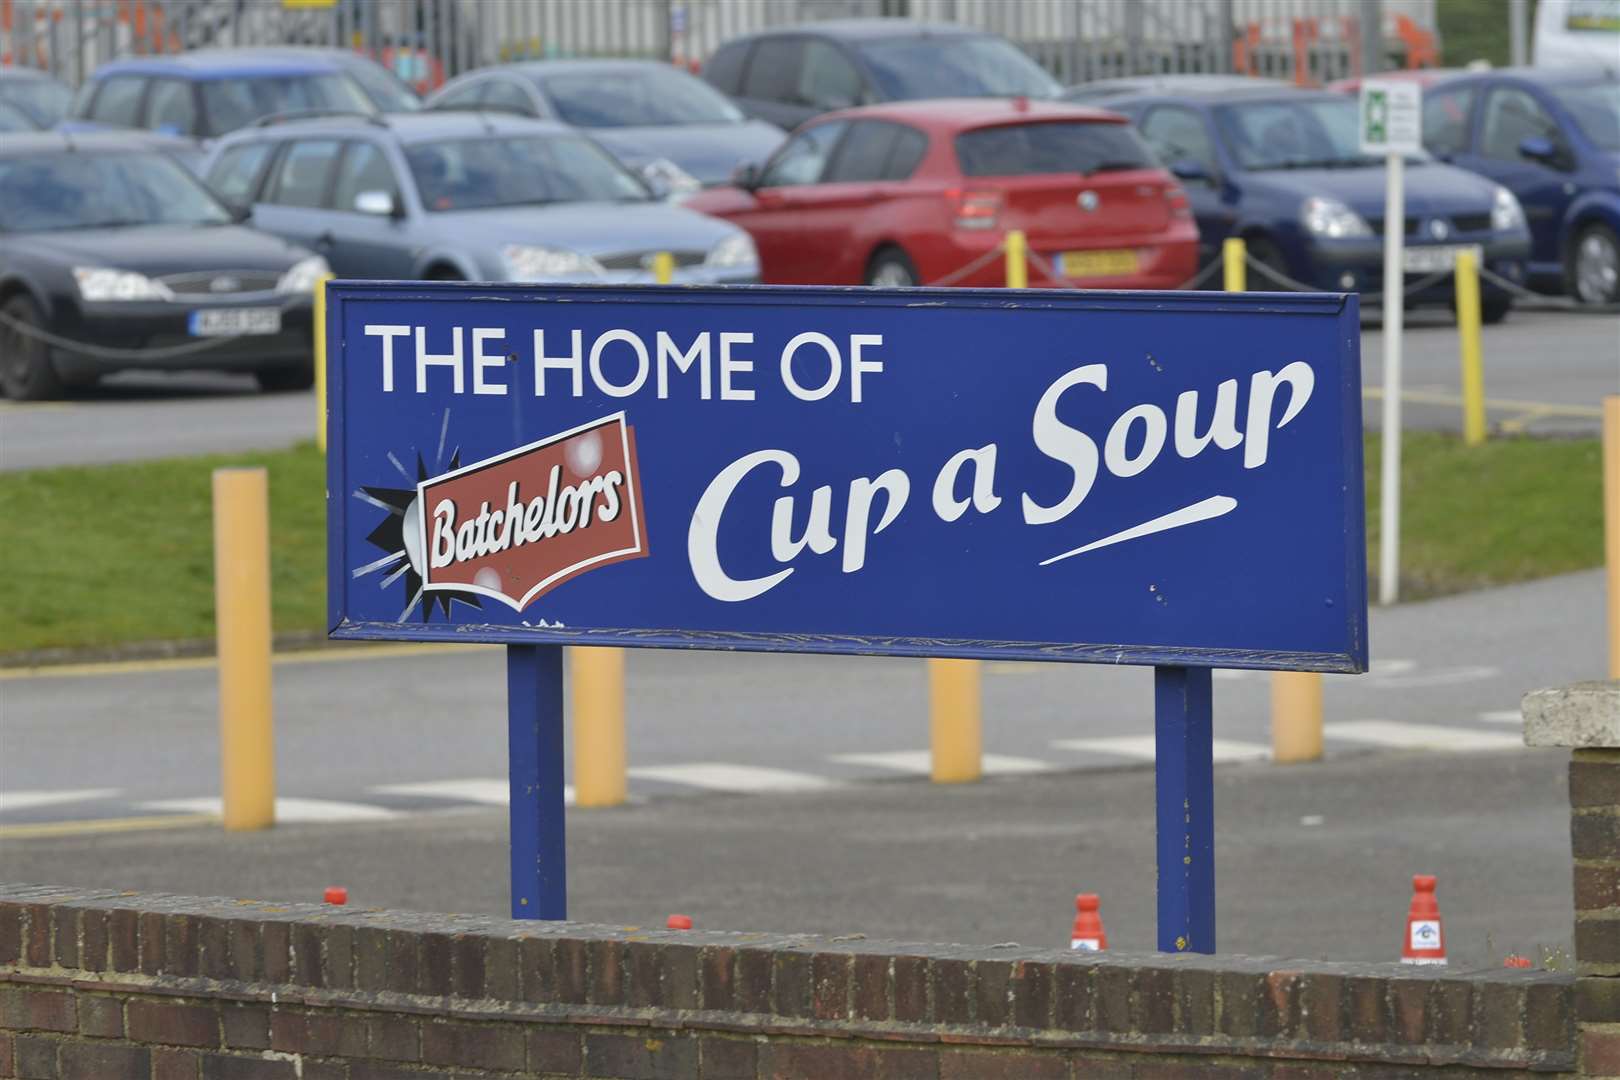 The Batchelors Cup a Soup factory in Ashford